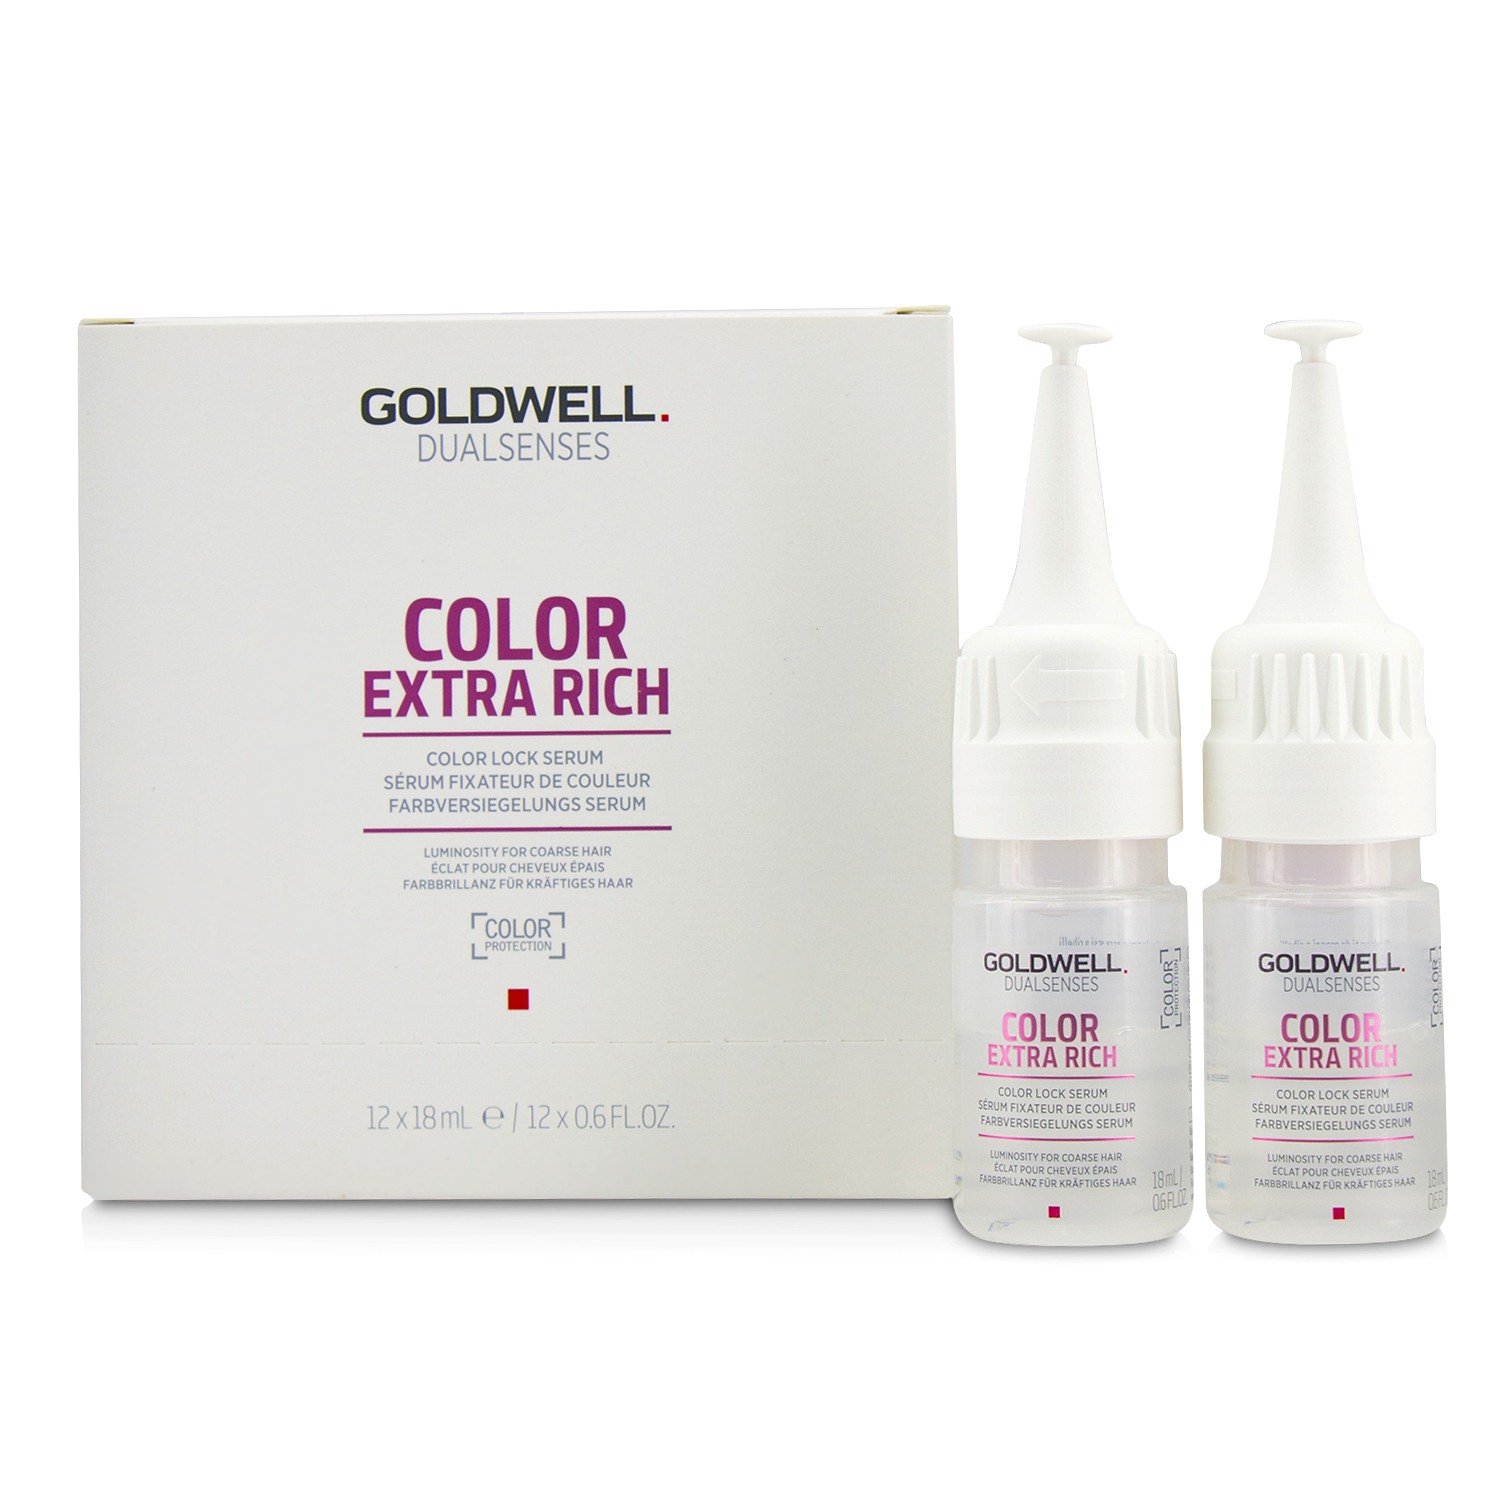 Dual Senses Color Extra Rich Color Lock Serum (Luminosity For Coarse Hair) Goldwell Image